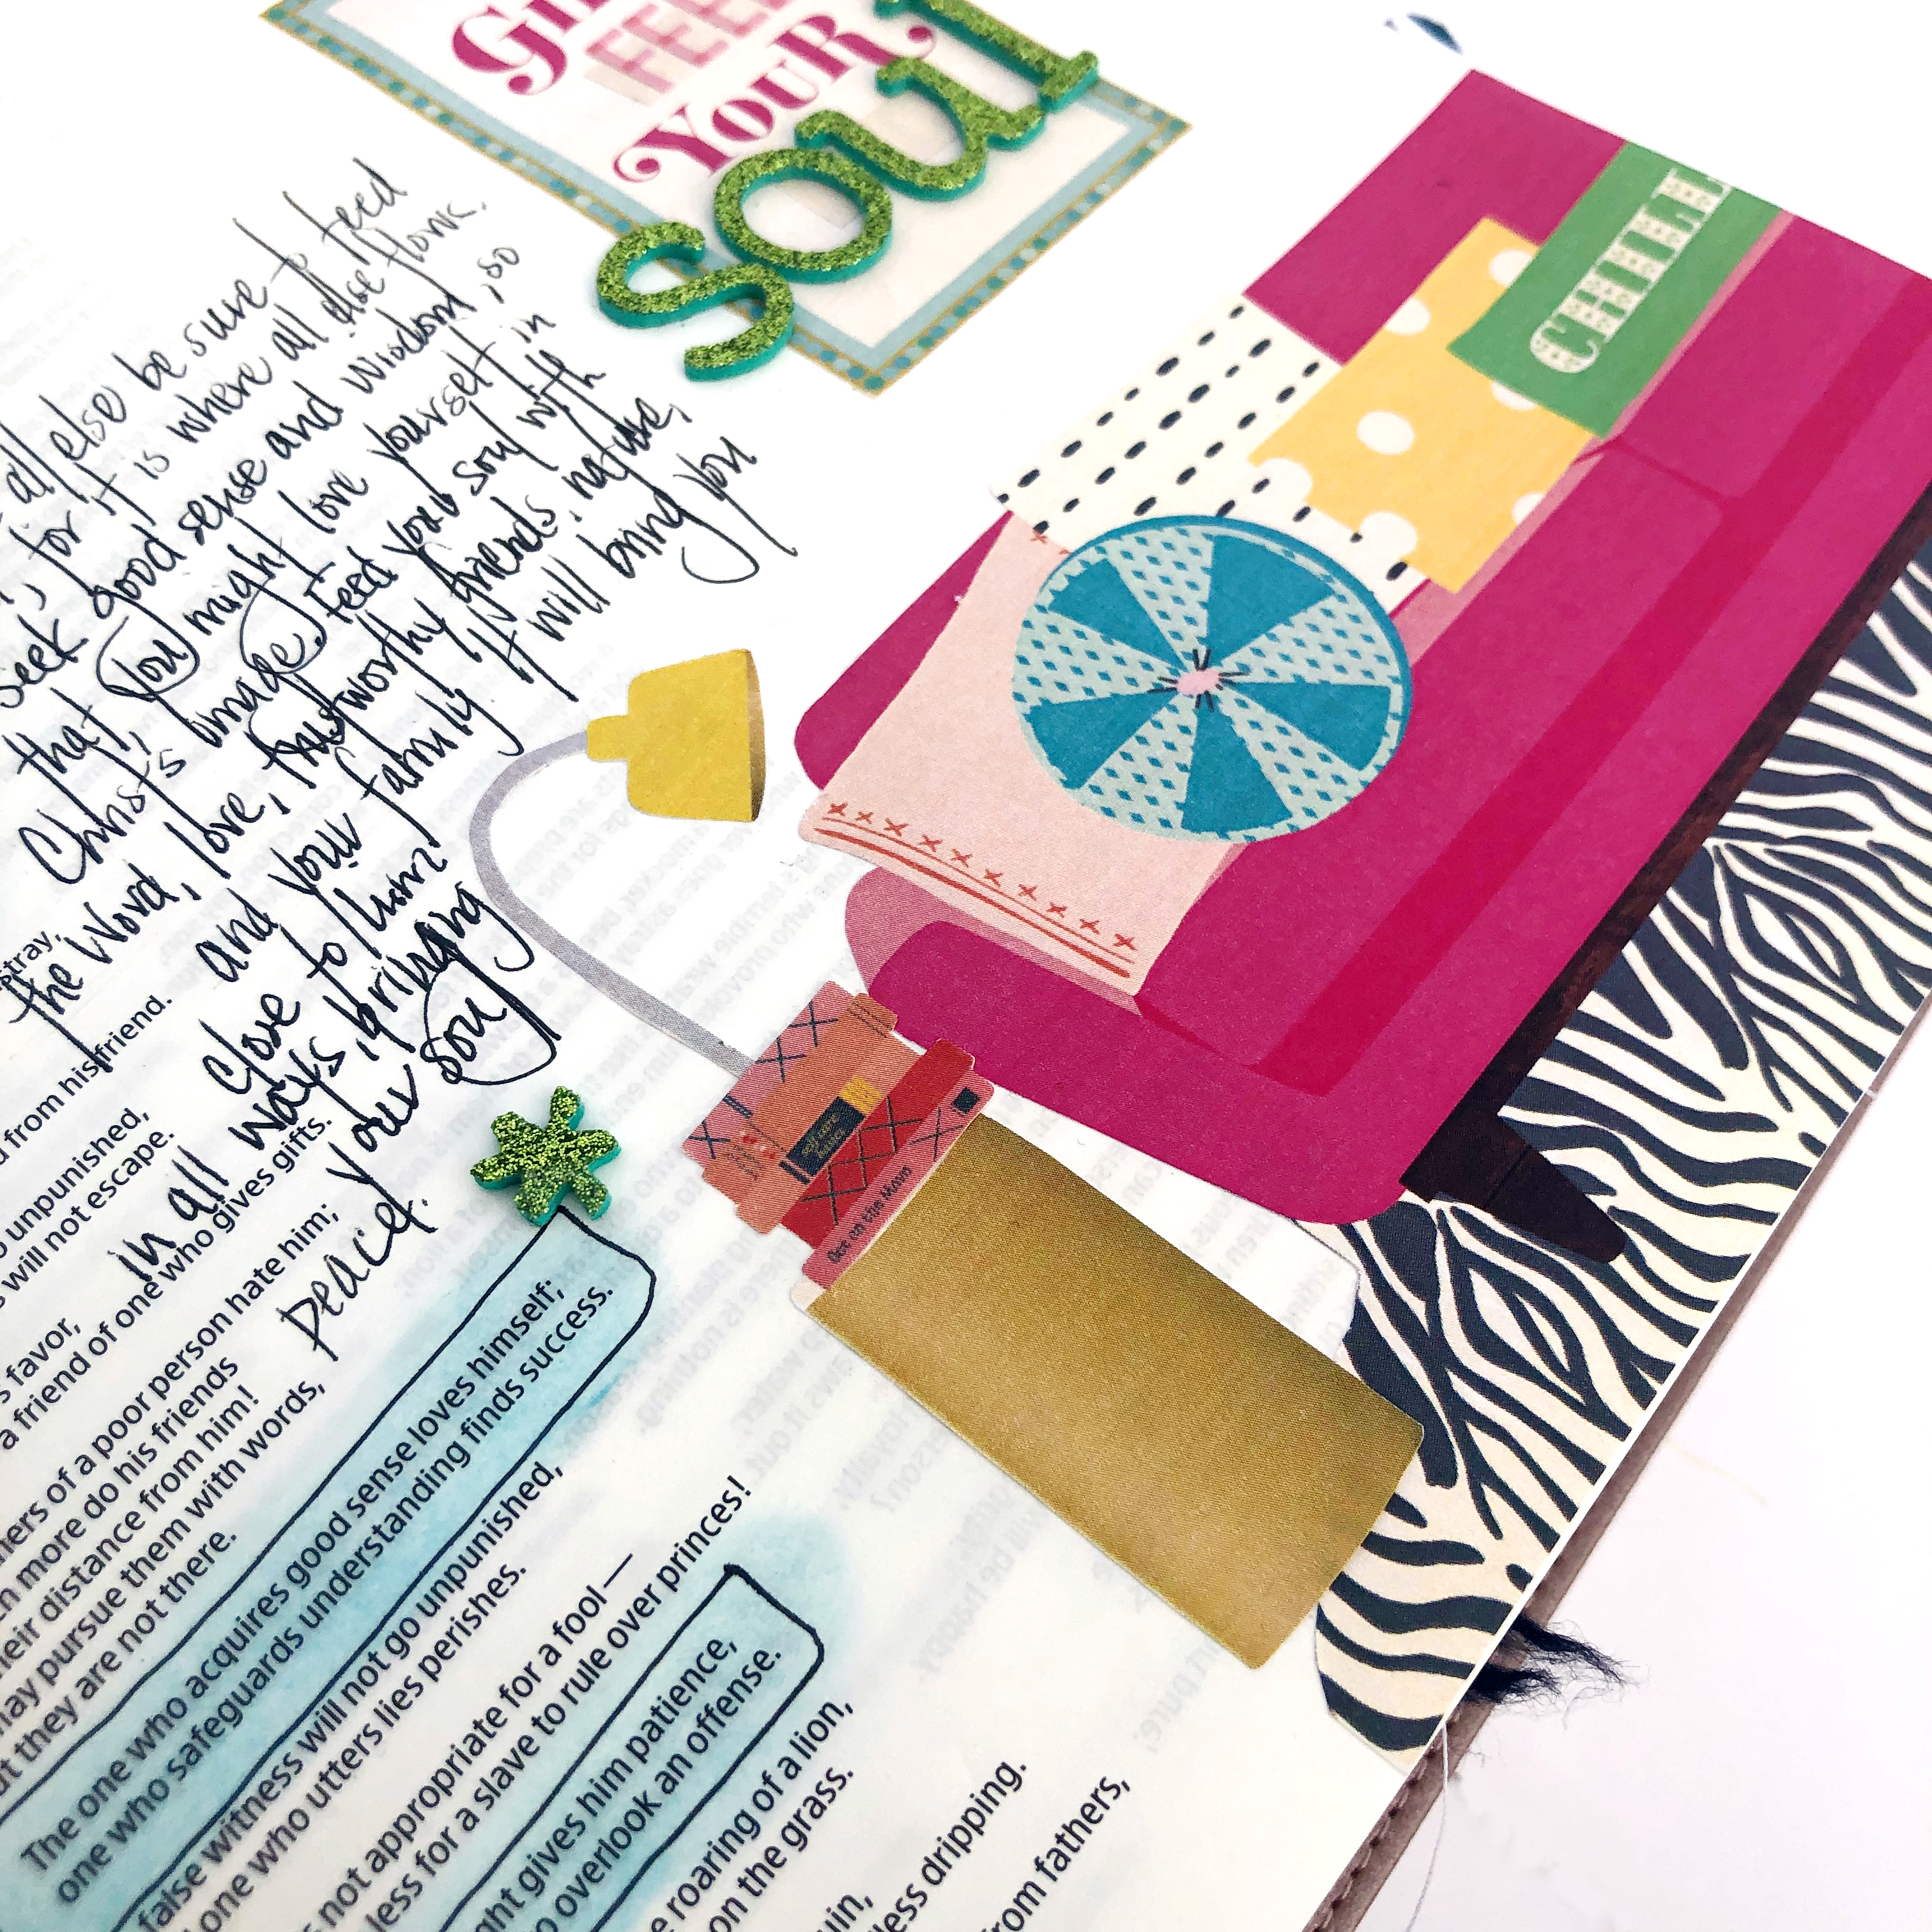 The Reset Girl Bible Journaling Page using The Pink Barlow Cover for The Reset Girl - Lydia Cost